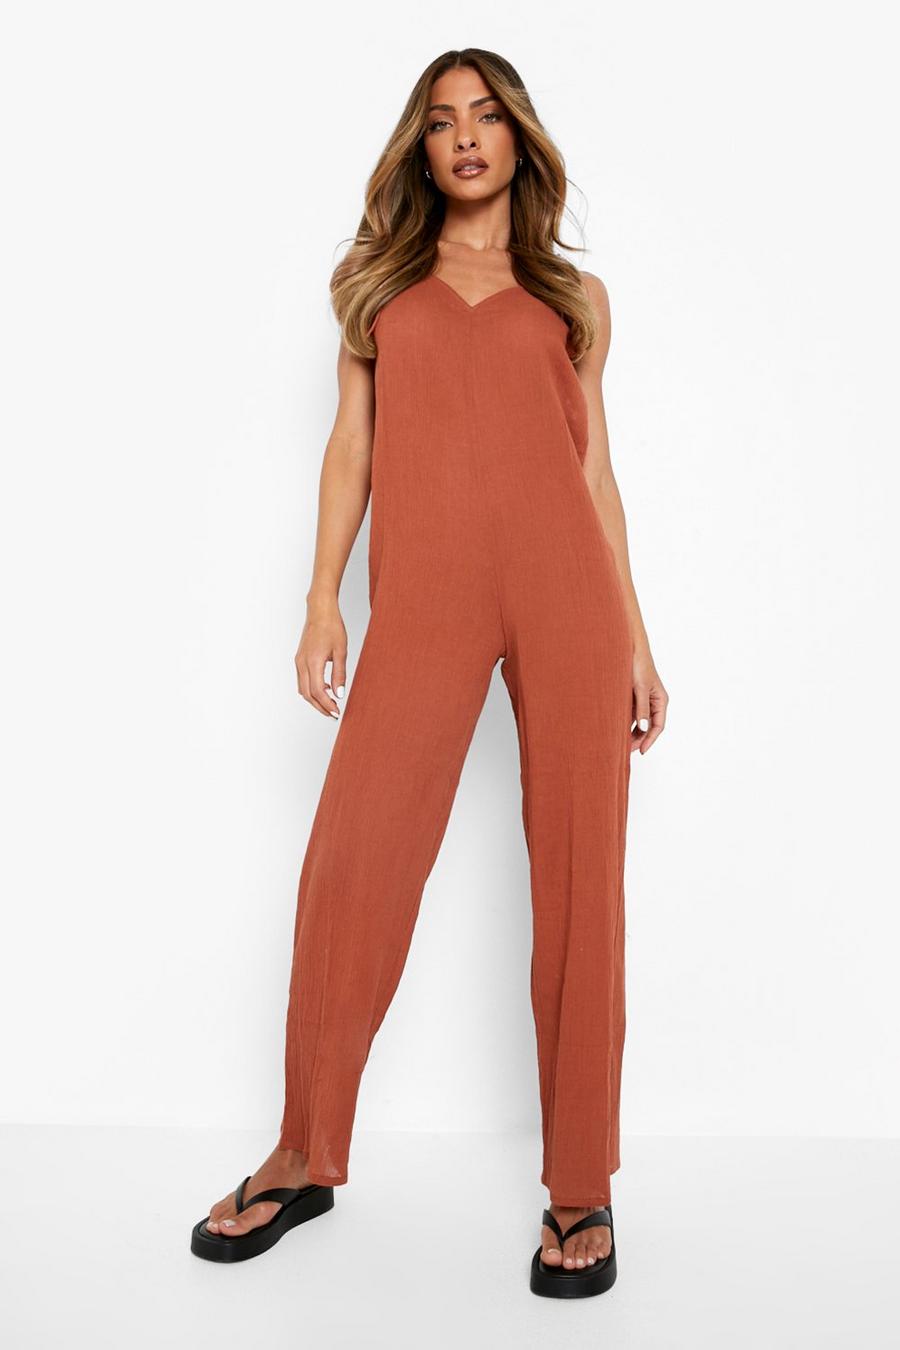 Tan marron Cheesecloth Strappy Trapeze Jumpsuit